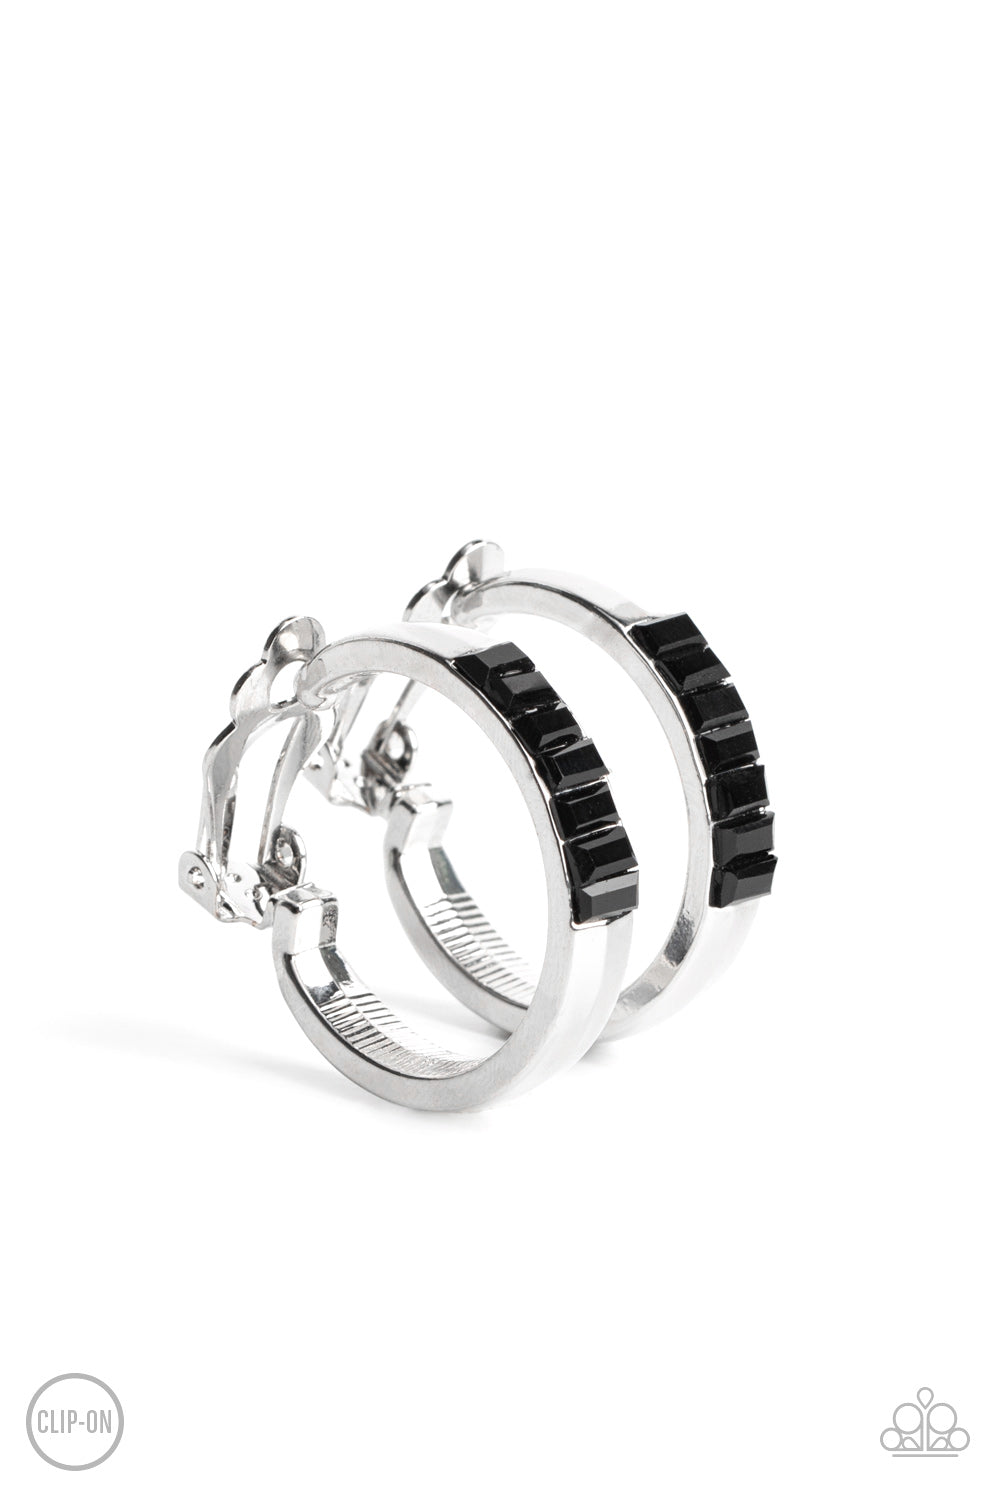 Ready, Steady, GLOW Black Clip-On Earring - Paparazzi Accessories  Featuring emerald style cuts, a row of glassy black rhinestones adorn the top front of a thick silver hoop for a classic finish. Earring attaches to a standard clip-on fitting.  Sold as one pair of clip-on earrings.